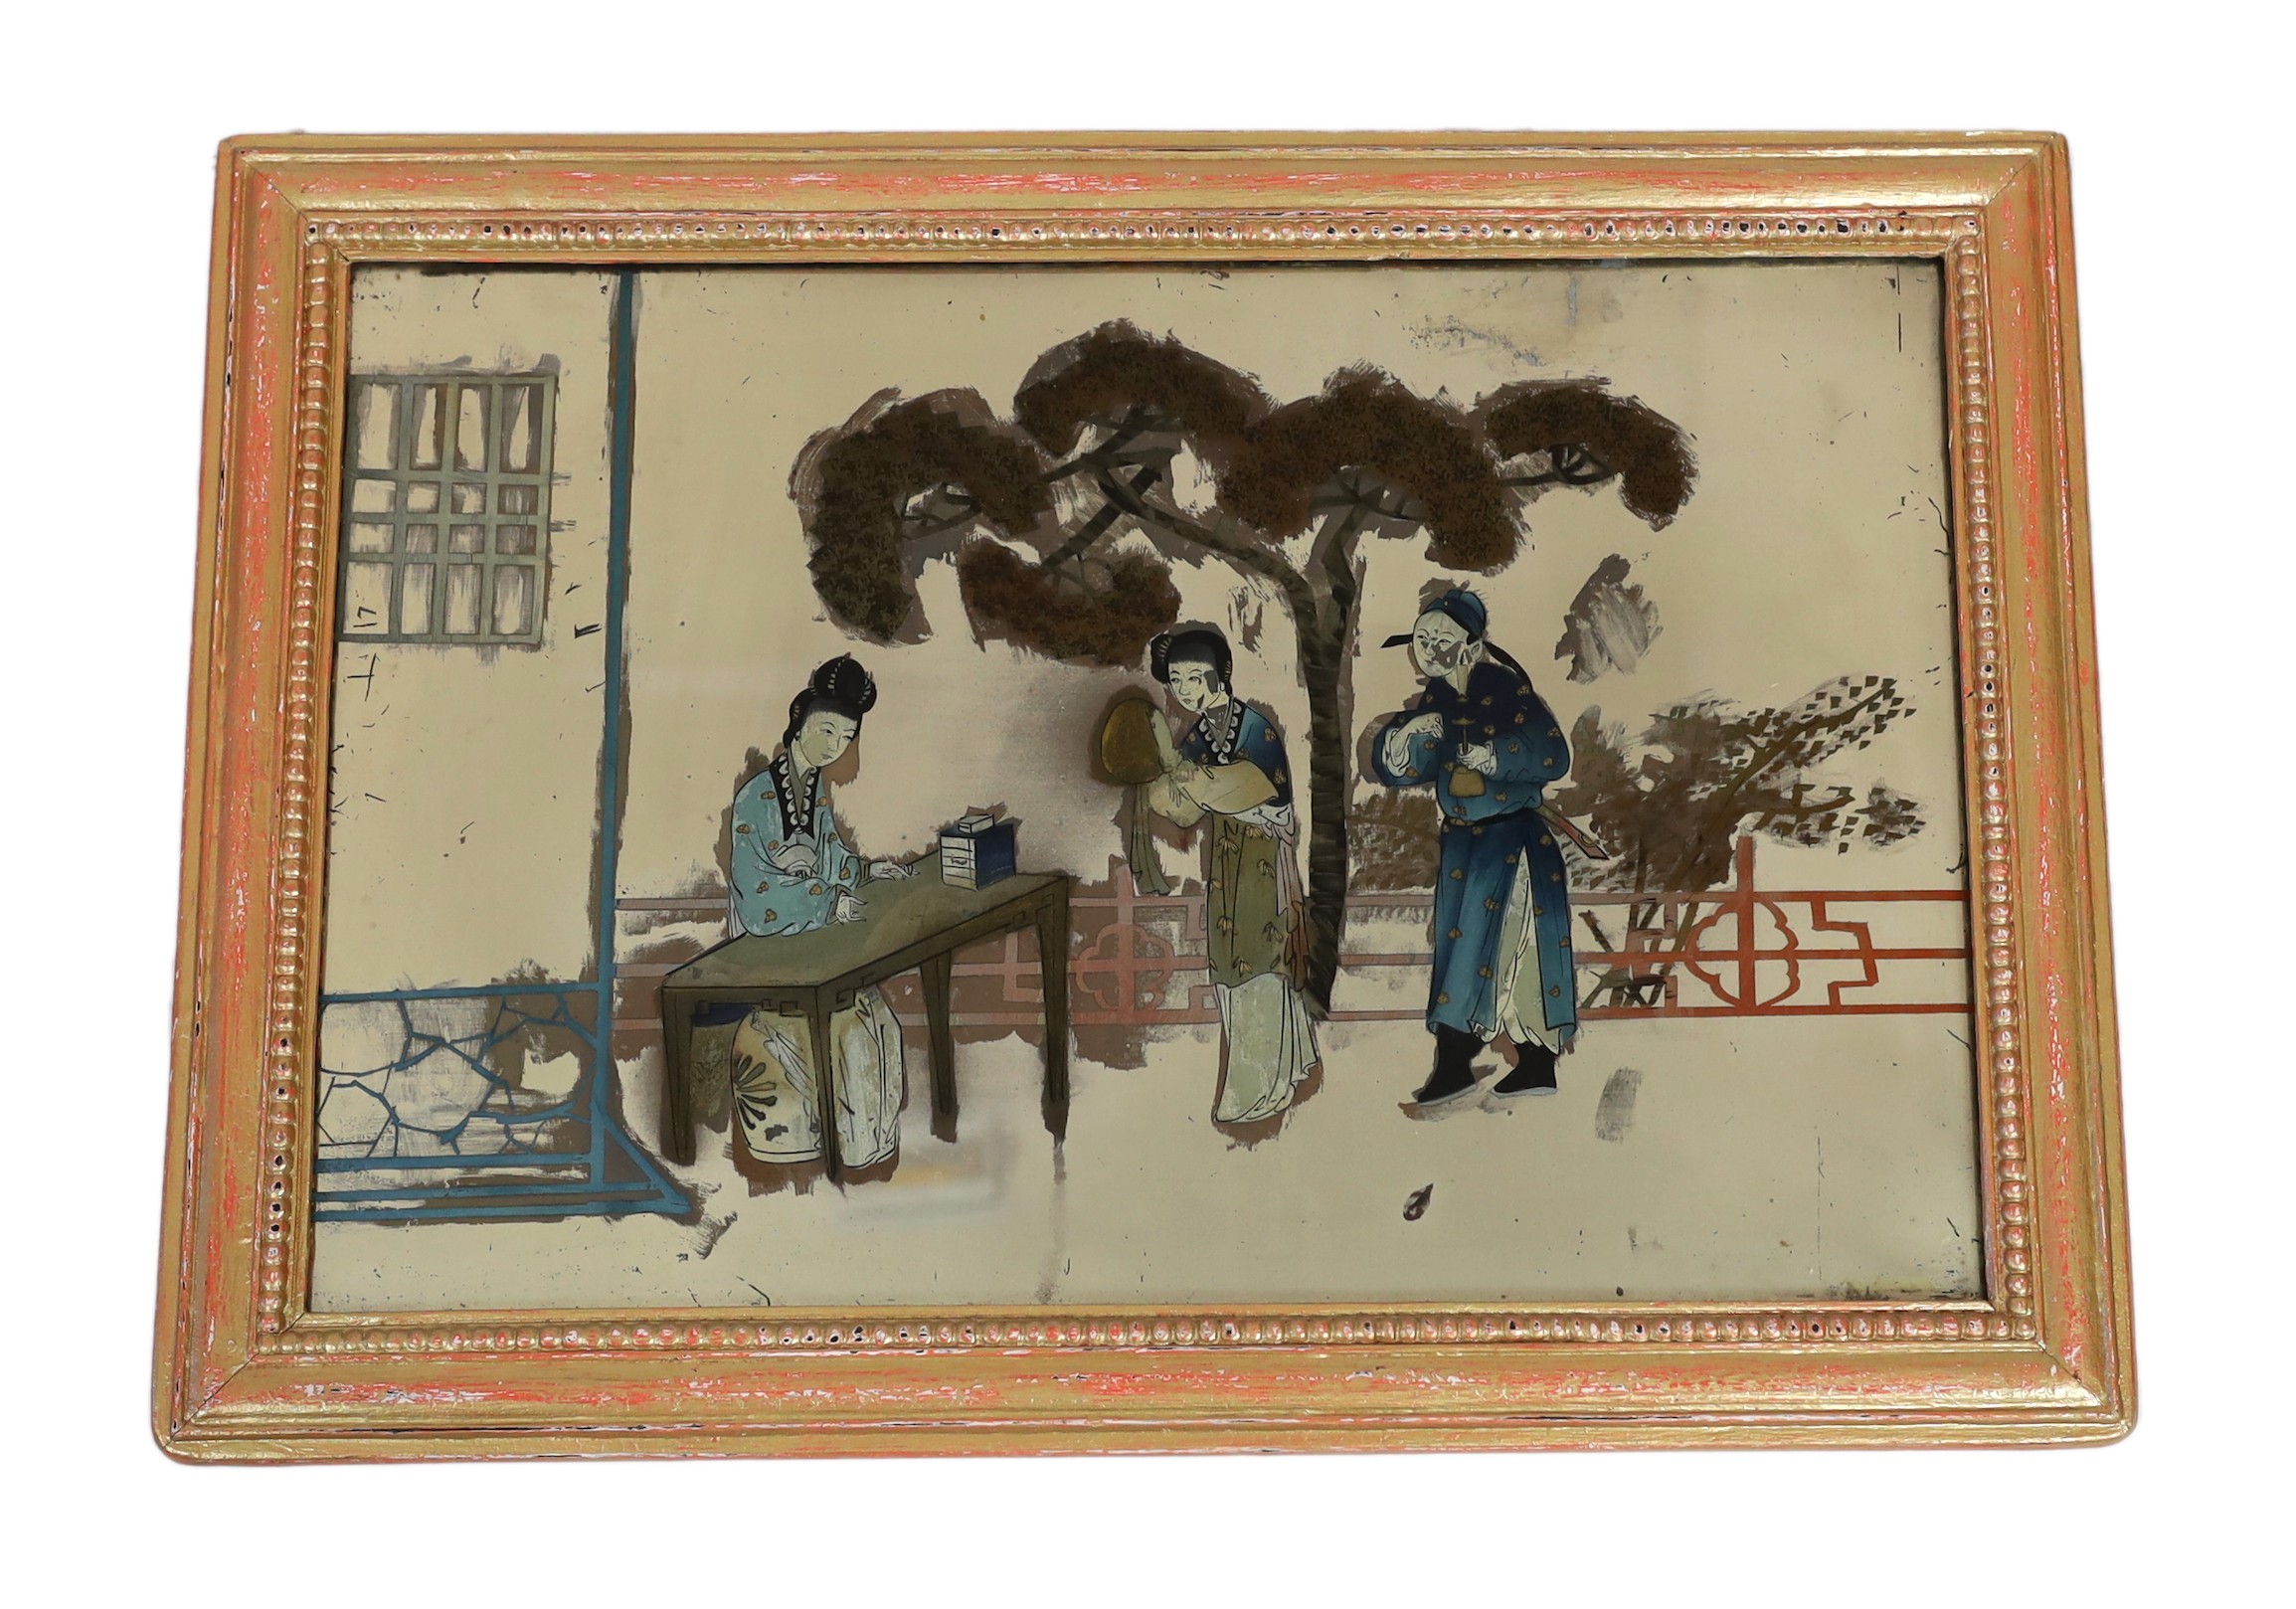 A 19th century Chinese reverse painted glass mirror, depicting a female scholar and figures in a garden, 38 x 59cm, in a period gilt frame